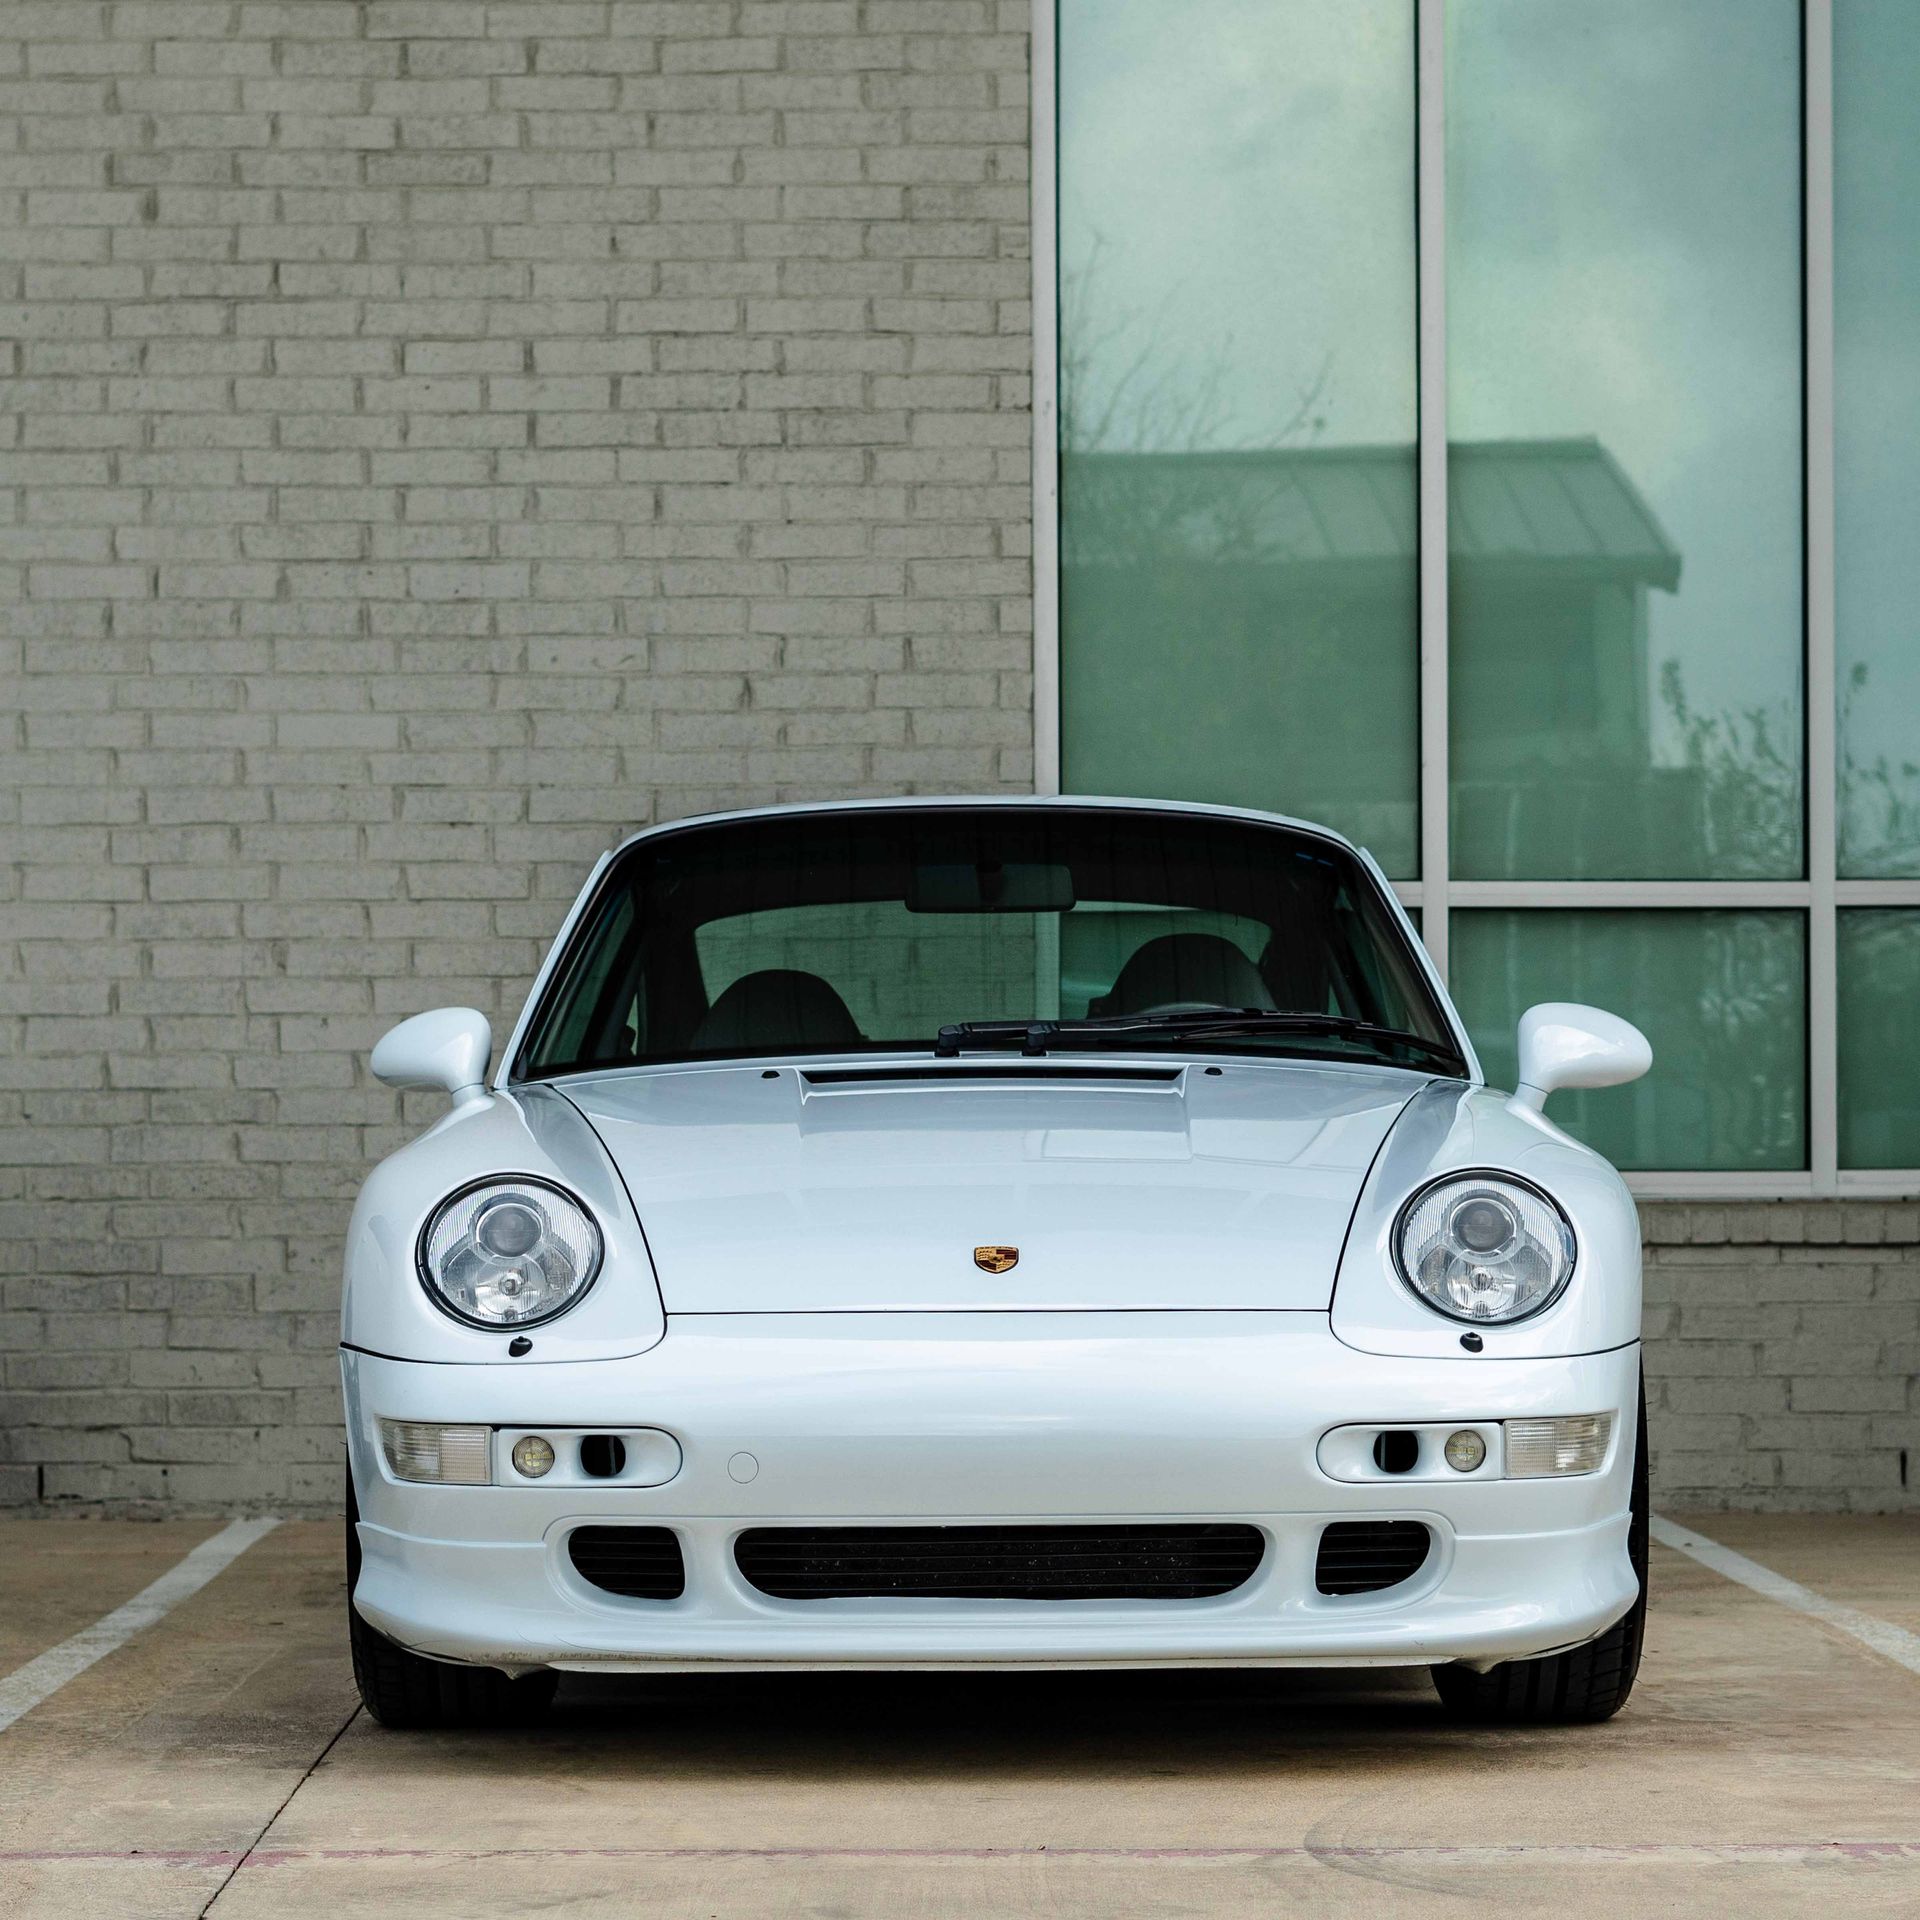 A white sports car is parked in front of a brick building